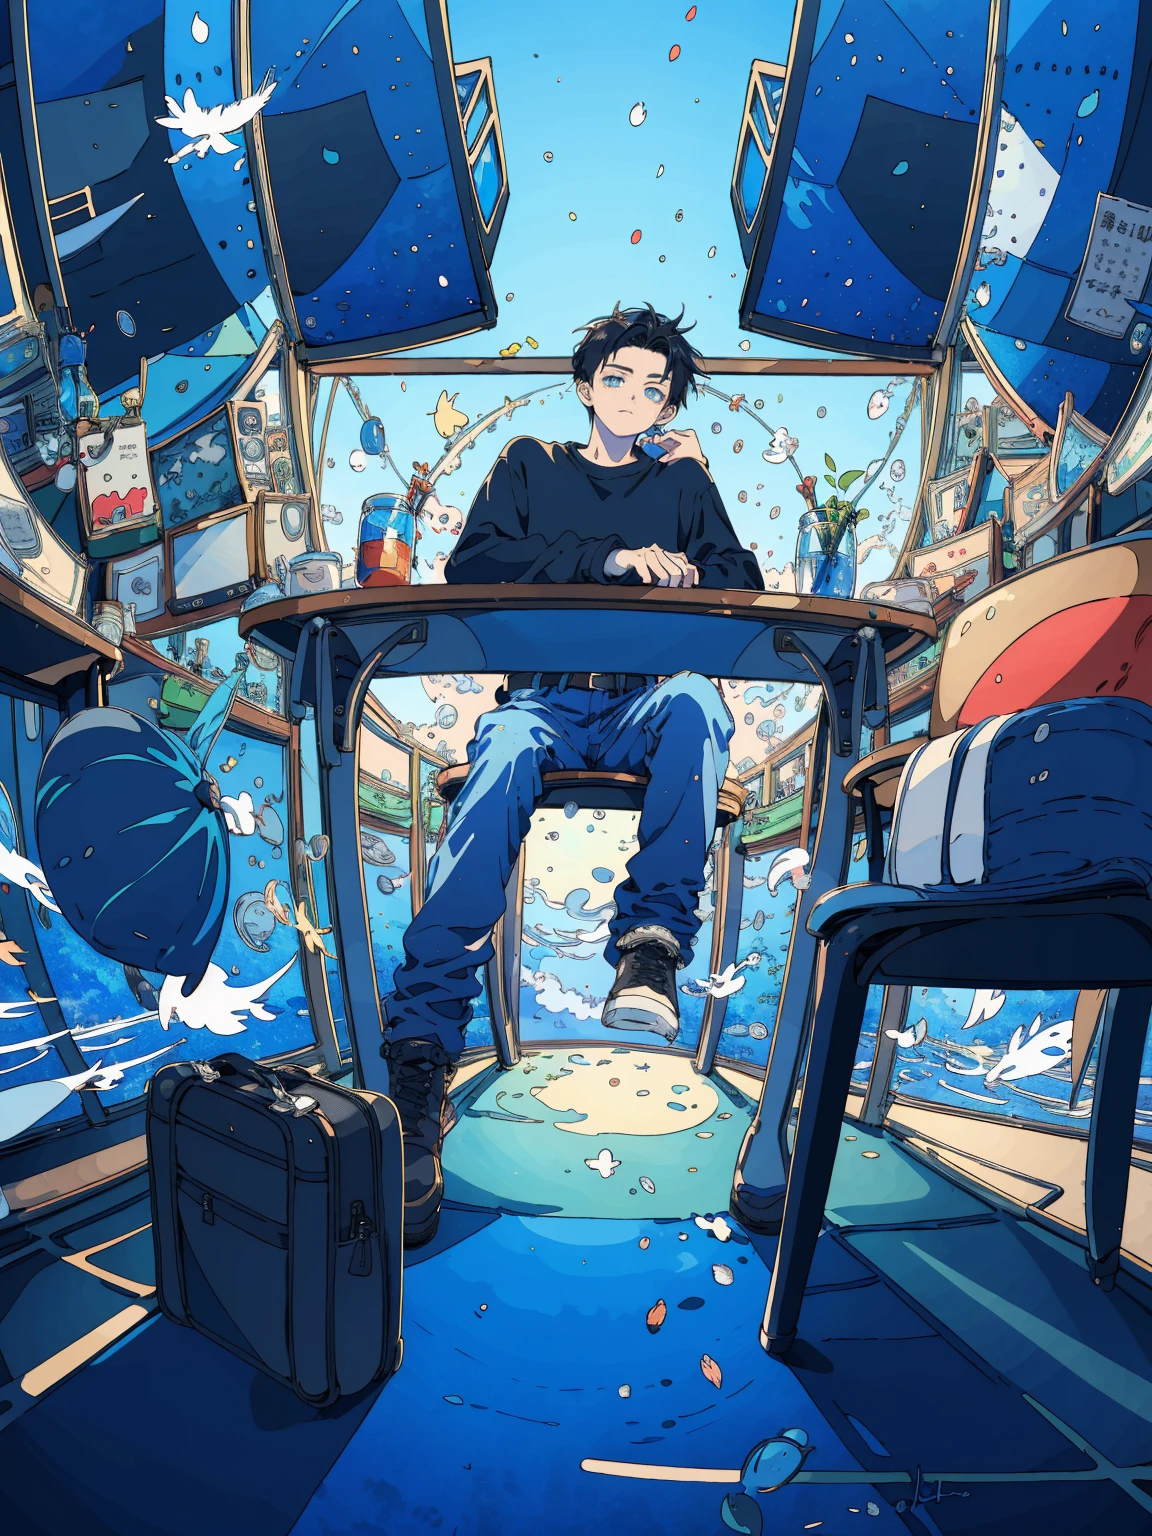 (masterpiece:1.2), best quality,PIXIV,fairy tale style, 18 years old, boy, black hair, blue eyes, indifferent, looking at the nearing dusk from the window, sitting inside of an classroom,


